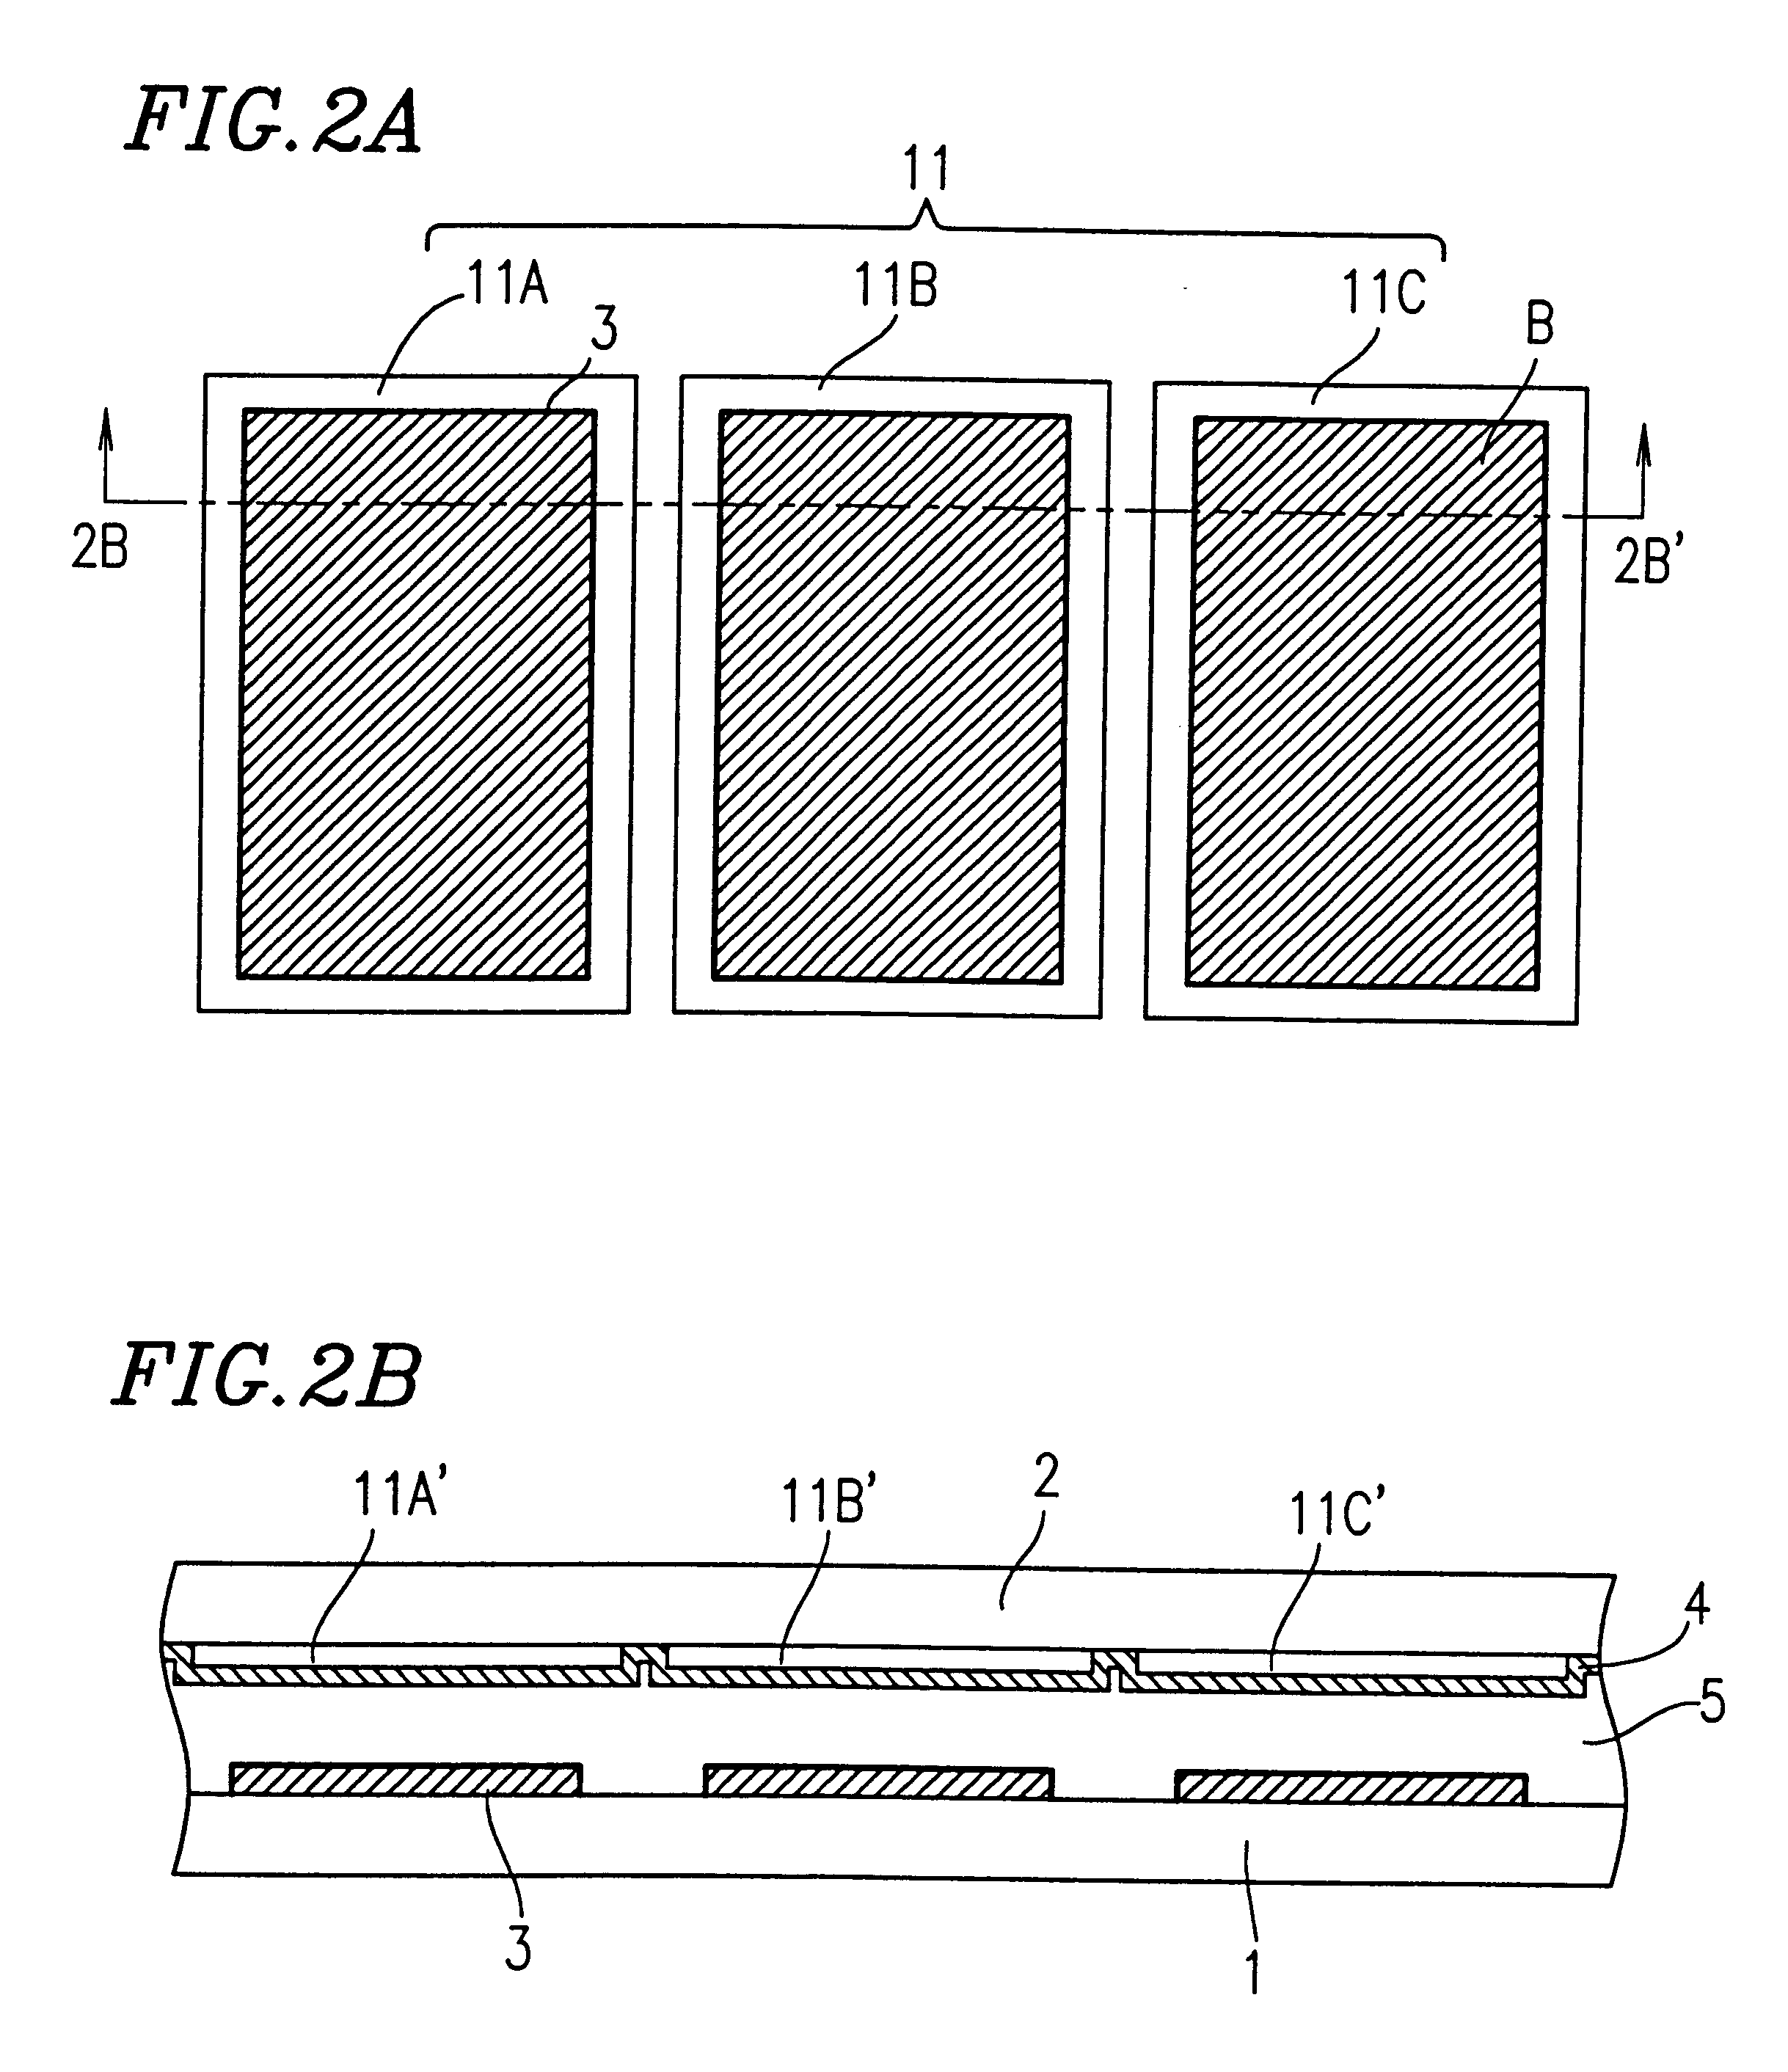 Liquid crystal display including both color filter and non-color filter regions for increasing brightness